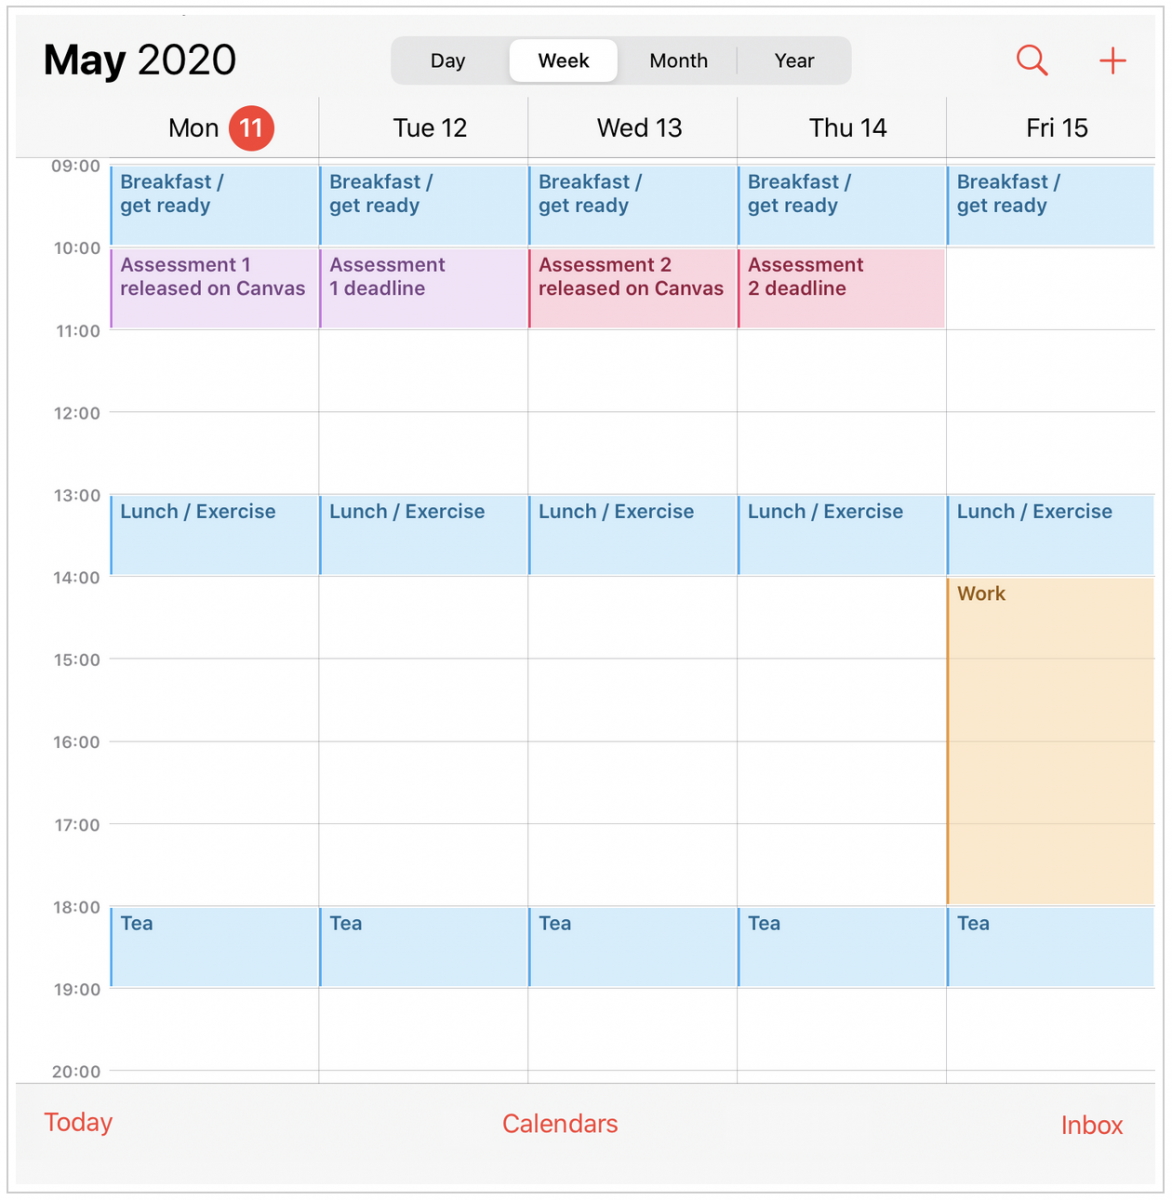 An image of a 2020 calendar with essential items added, like breakfast, lunch and tea